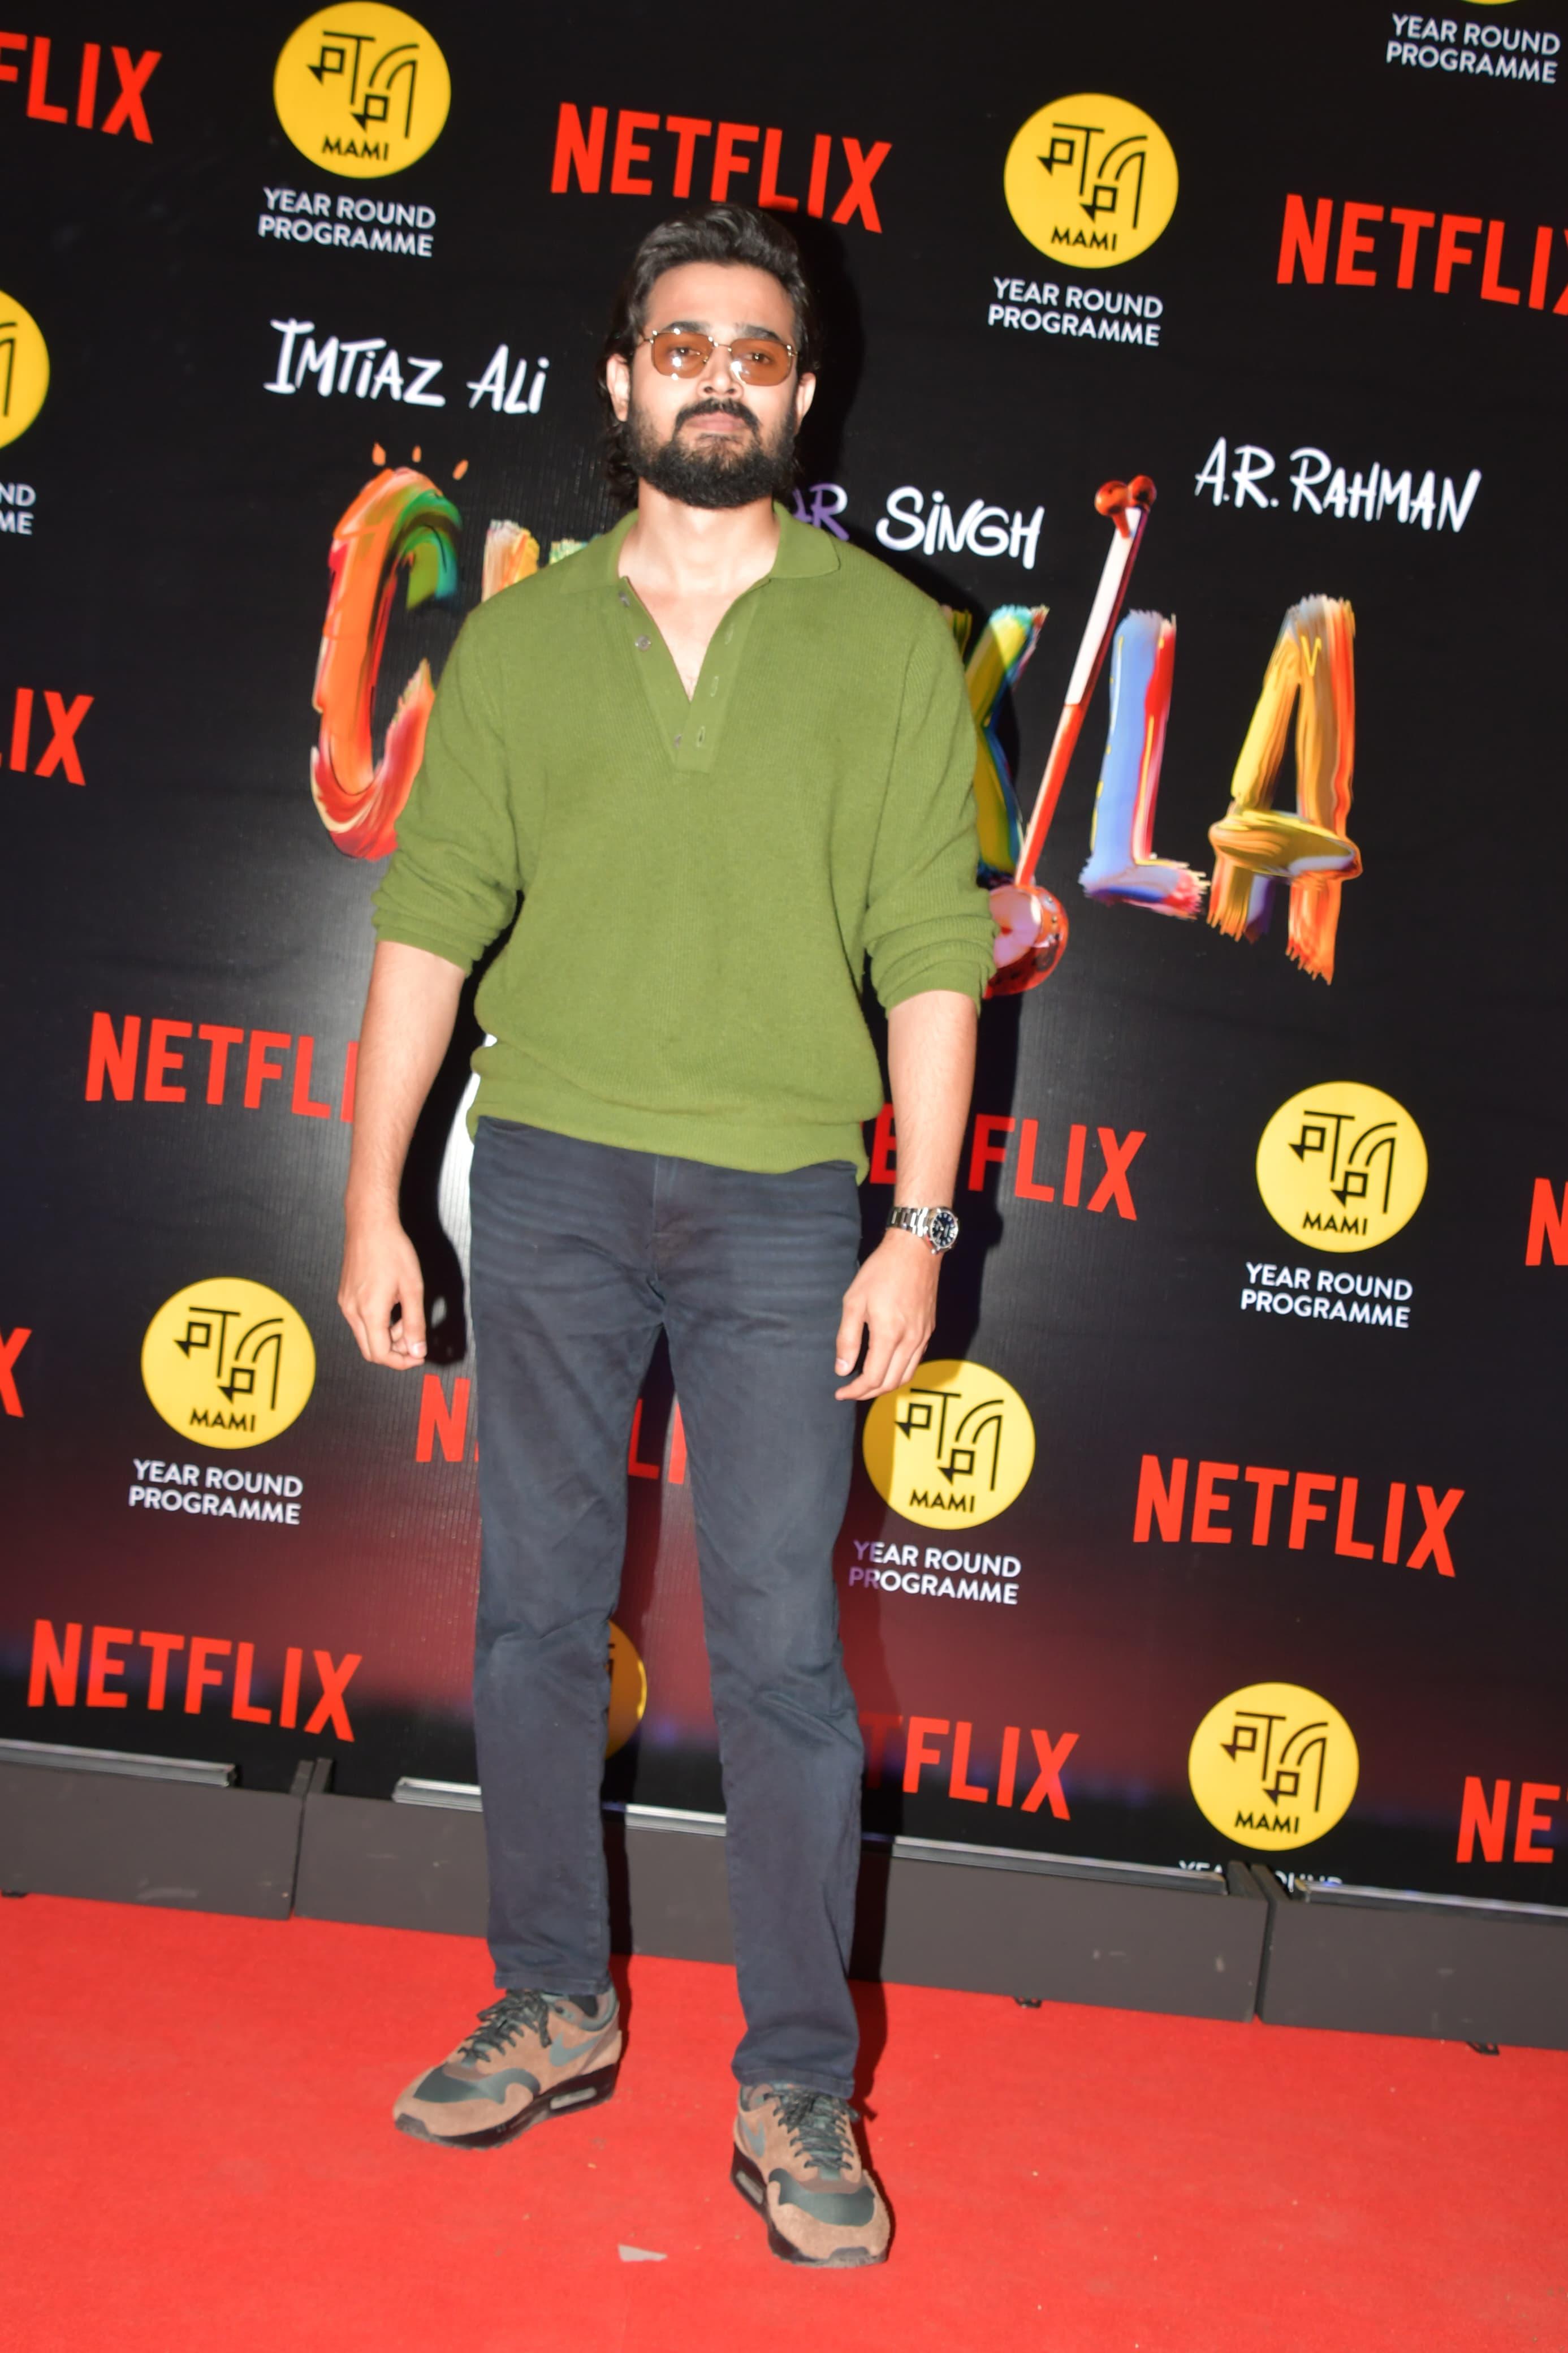 Influencer and content creator Bhuvan Bam was also snapped at the red carpet of Amar Singh Chamkila's screening